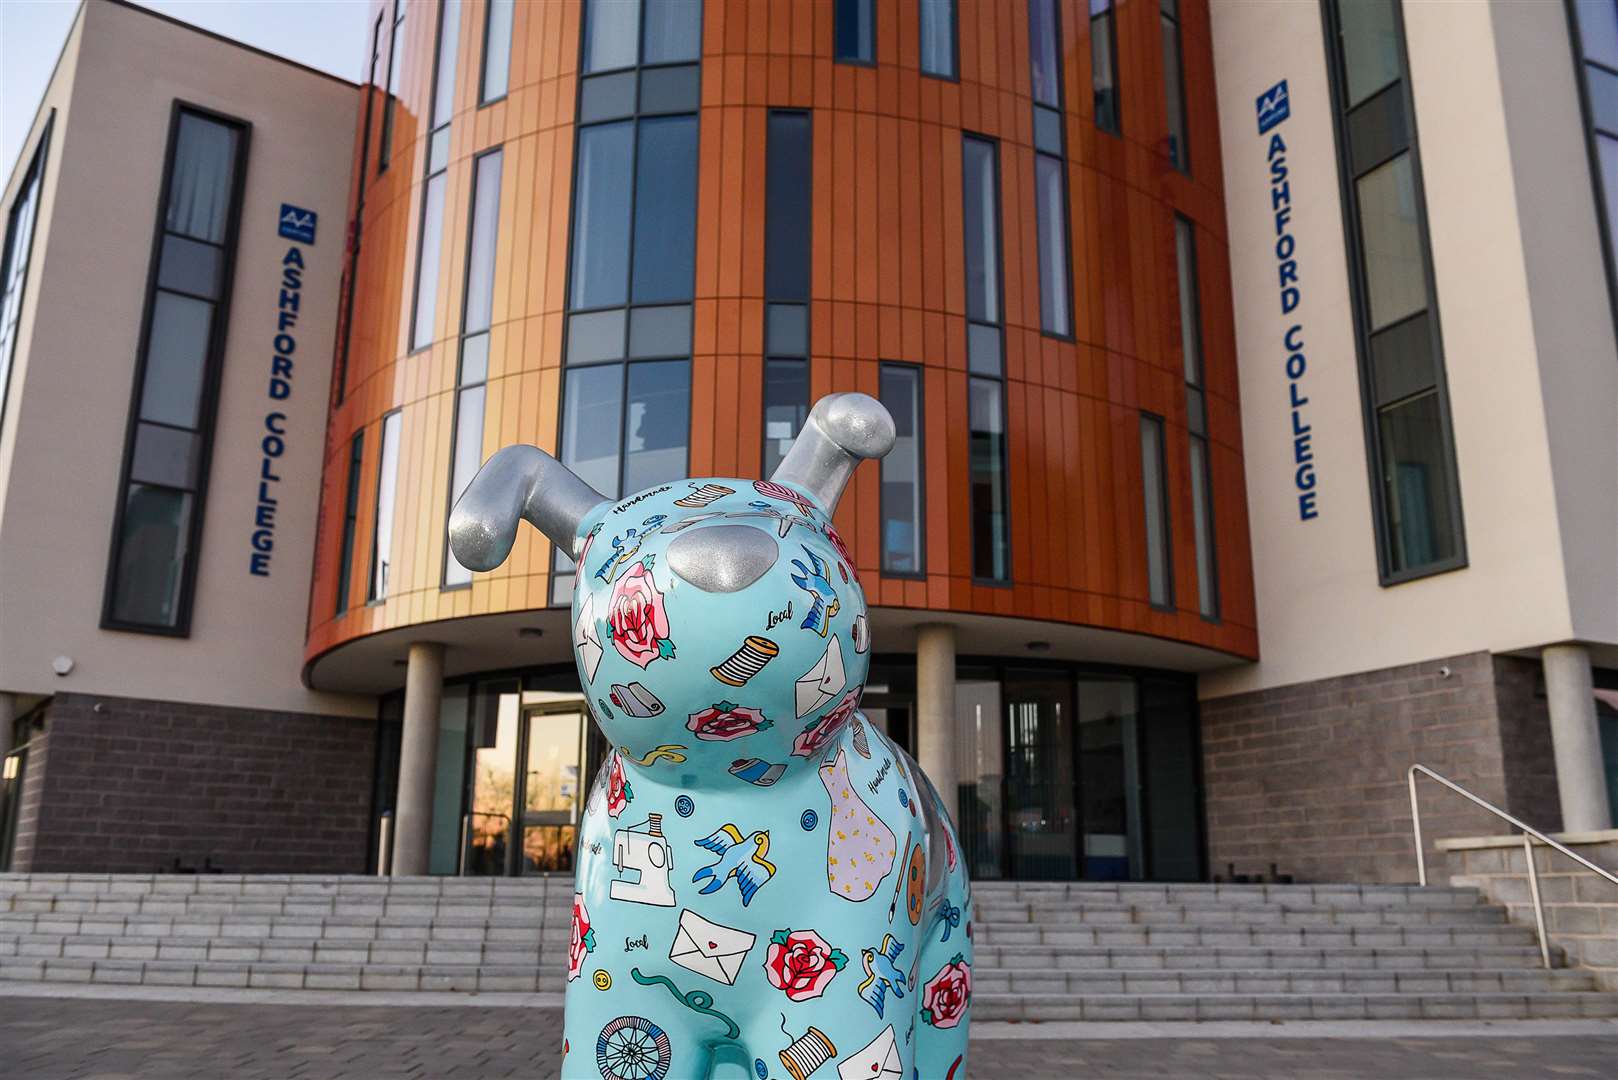 The Snowdogs will be displayed one last time this weekend, before going to their 'furever homes' following Monday's auction. Picture: Alan Langley